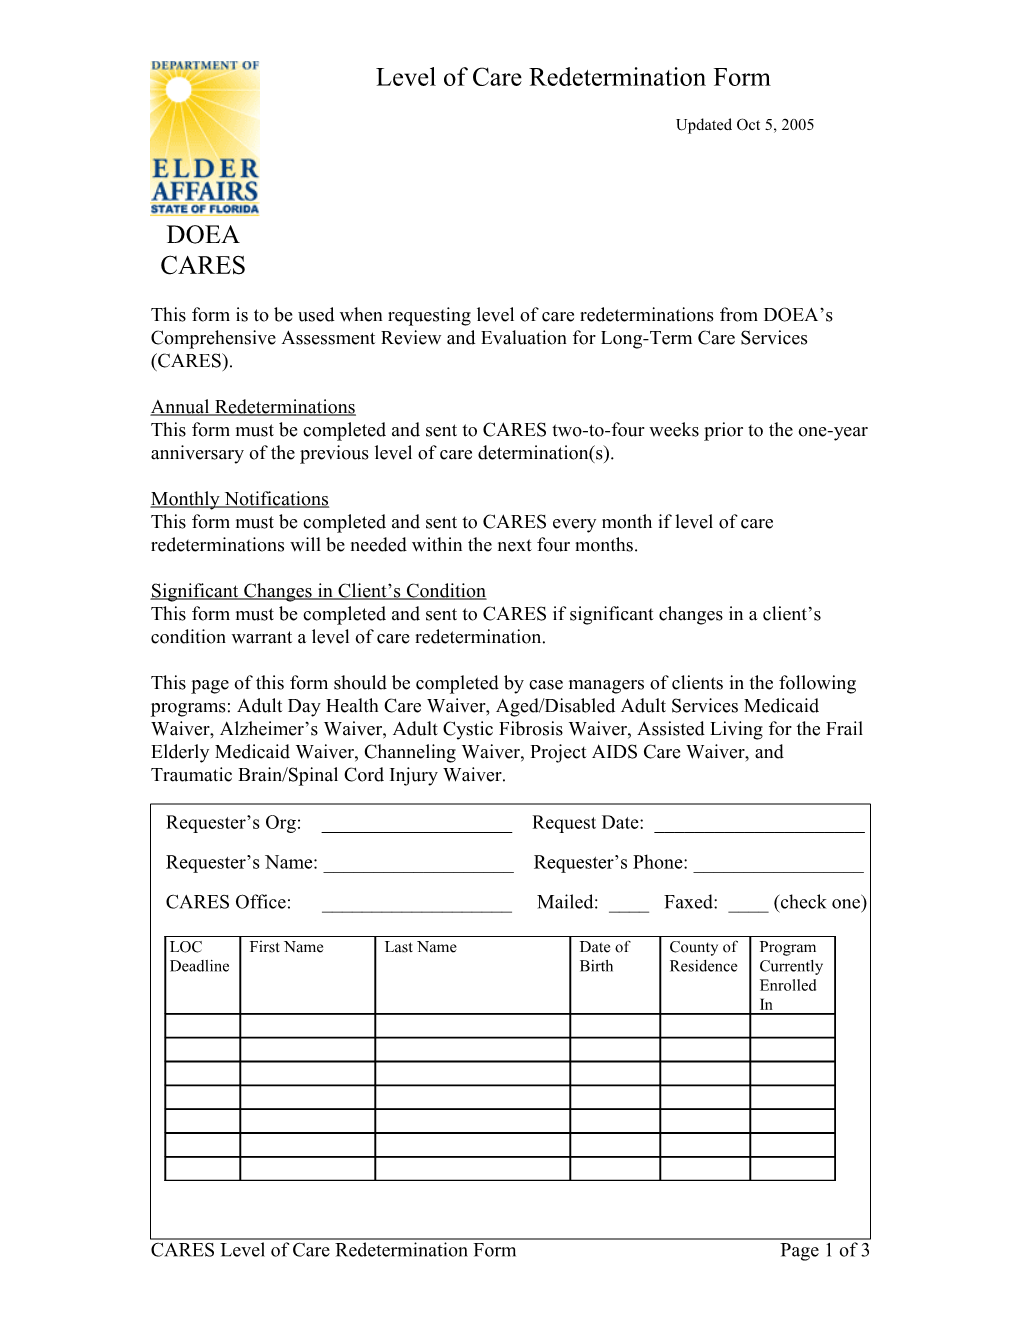 Level of Care Redetermination Form